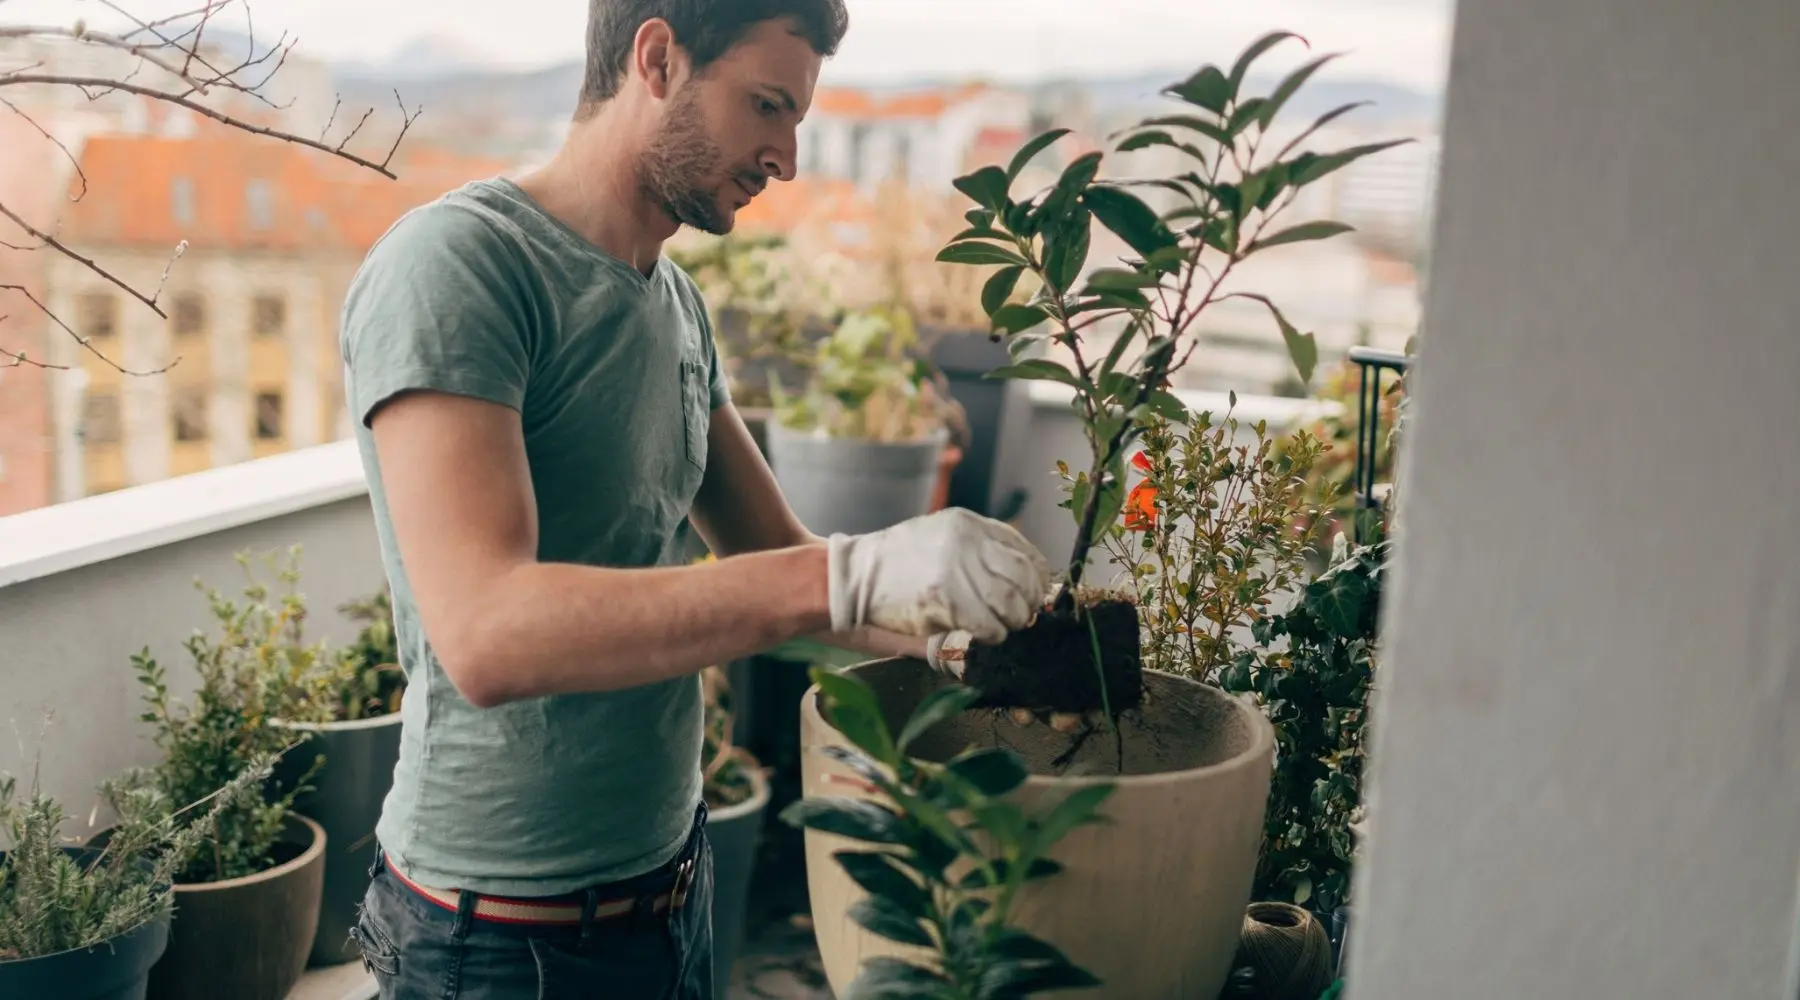 A young man tends to potted plants on his balcony.